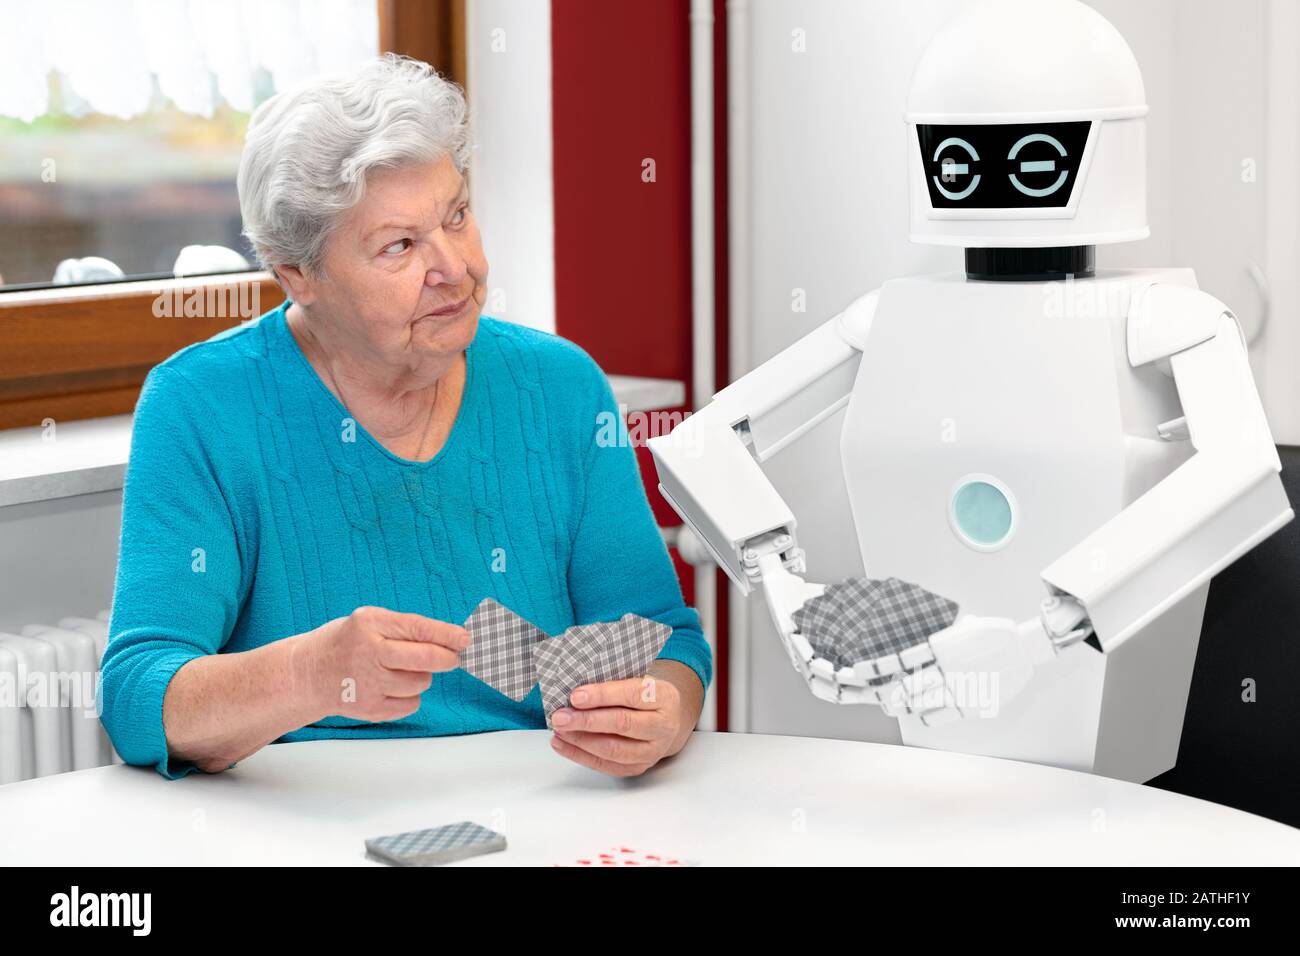 ambient assisted living service robot is playing a card game with a senior adult woman, concepts like robotic caregiver in the household or old folks Stock Photo